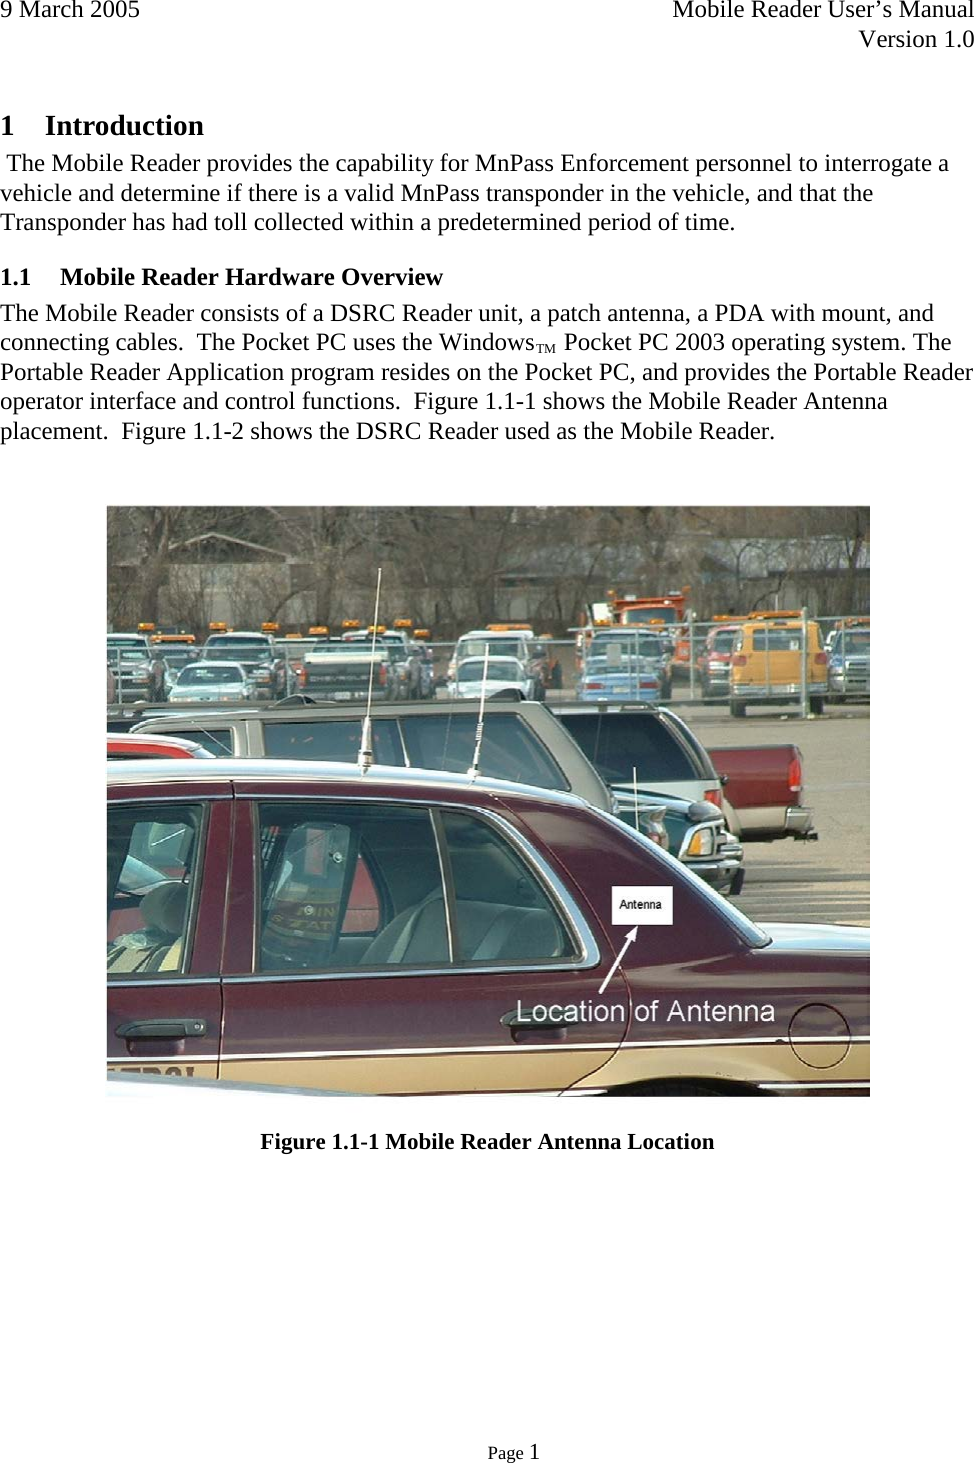 9 March 2005    Mobile Reader User’s Manual   Version 1.0      Page 1  1 Introduction  The Mobile Reader provides the capability for MnPass Enforcement personnel to interrogate a vehicle and determine if there is a valid MnPass transponder in the vehicle, and that the Transponder has had toll collected within a predetermined period of time. 1.1 Mobile Reader Hardware Overview The Mobile Reader consists of a DSRC Reader unit, a patch antenna, a PDA with mount, and connecting cables.  The Pocket PC uses the WindowsTM Pocket PC 2003 operating system. The Portable Reader Application program resides on the Pocket PC, and provides the Portable Reader operator interface and control functions.  Figure 1.1-1 shows the Mobile Reader Antenna placement.  Figure 1.1-2 shows the DSRC Reader used as the Mobile Reader.    Figure 1.1-1 Mobile Reader Antenna Location    